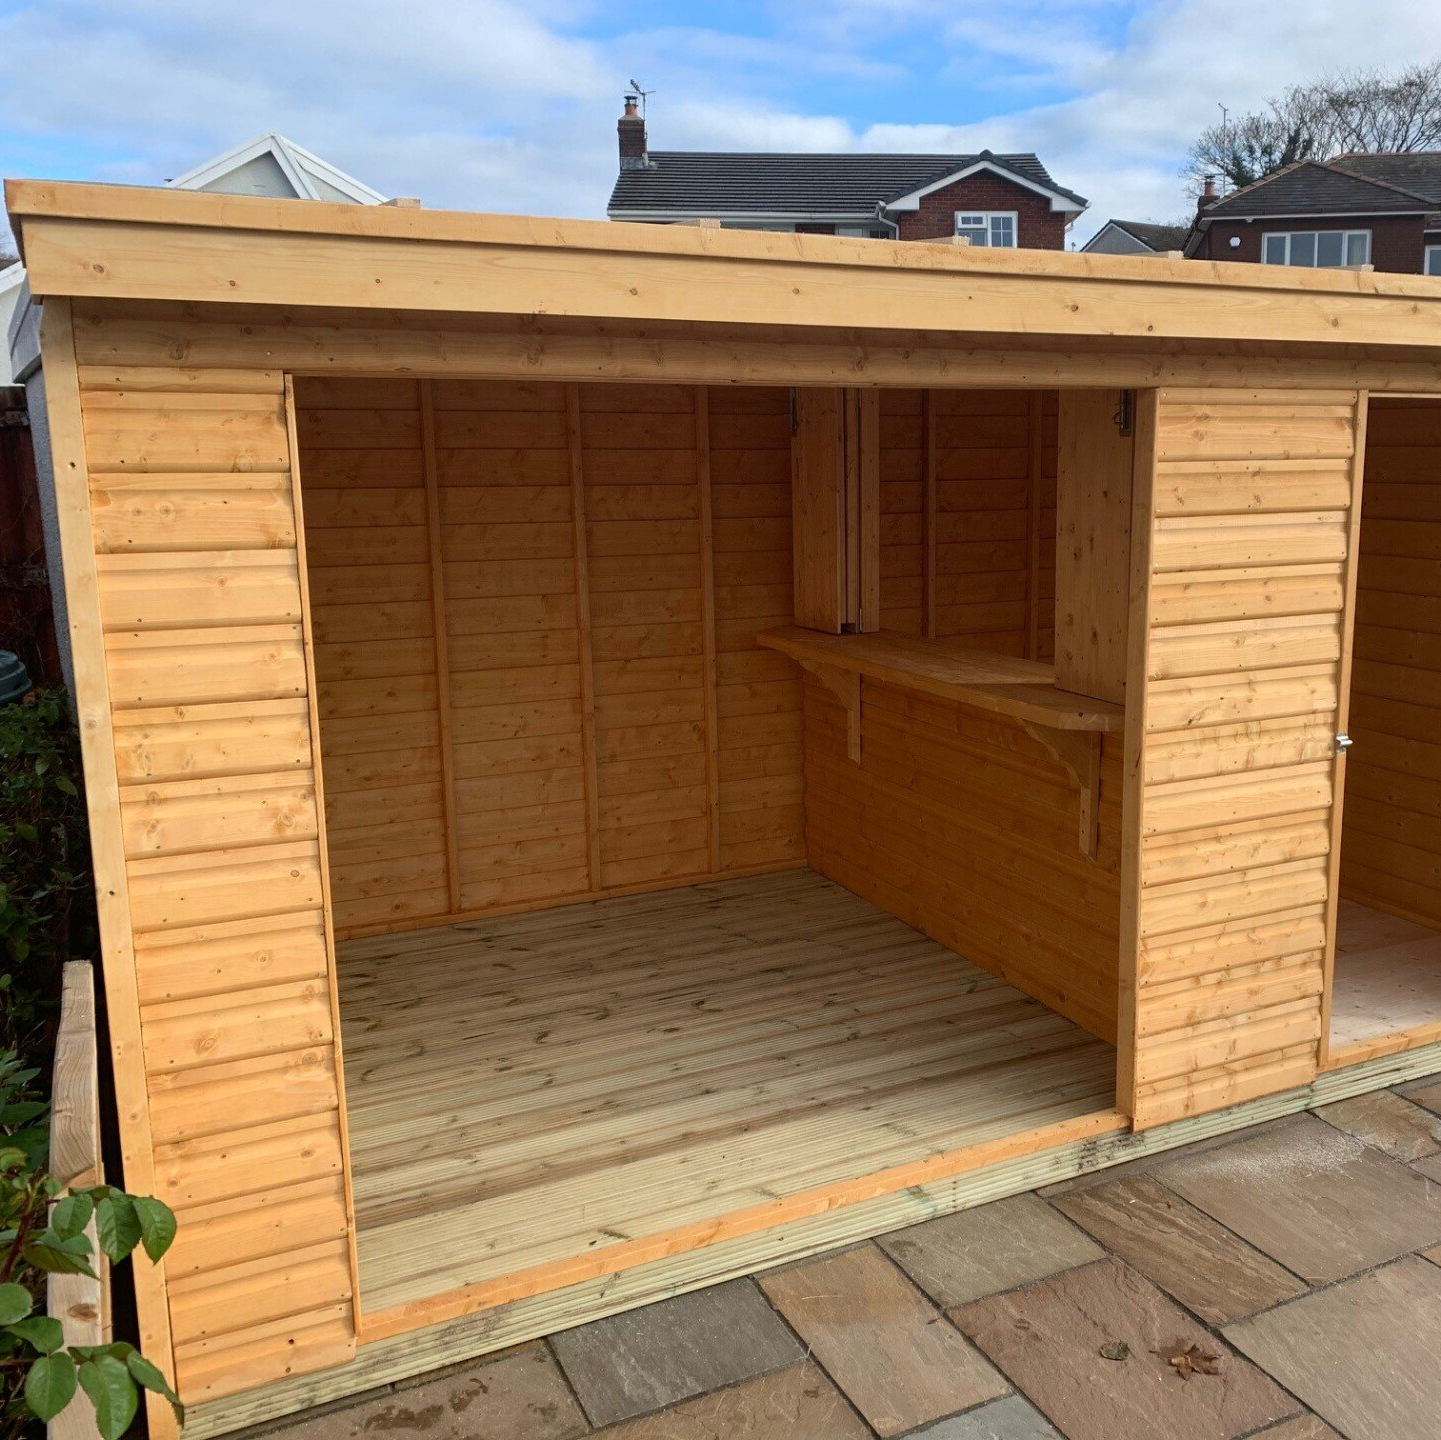 Pent style gazebo with a shed built in as a bar then decking flooring to stand hot tub or seating.